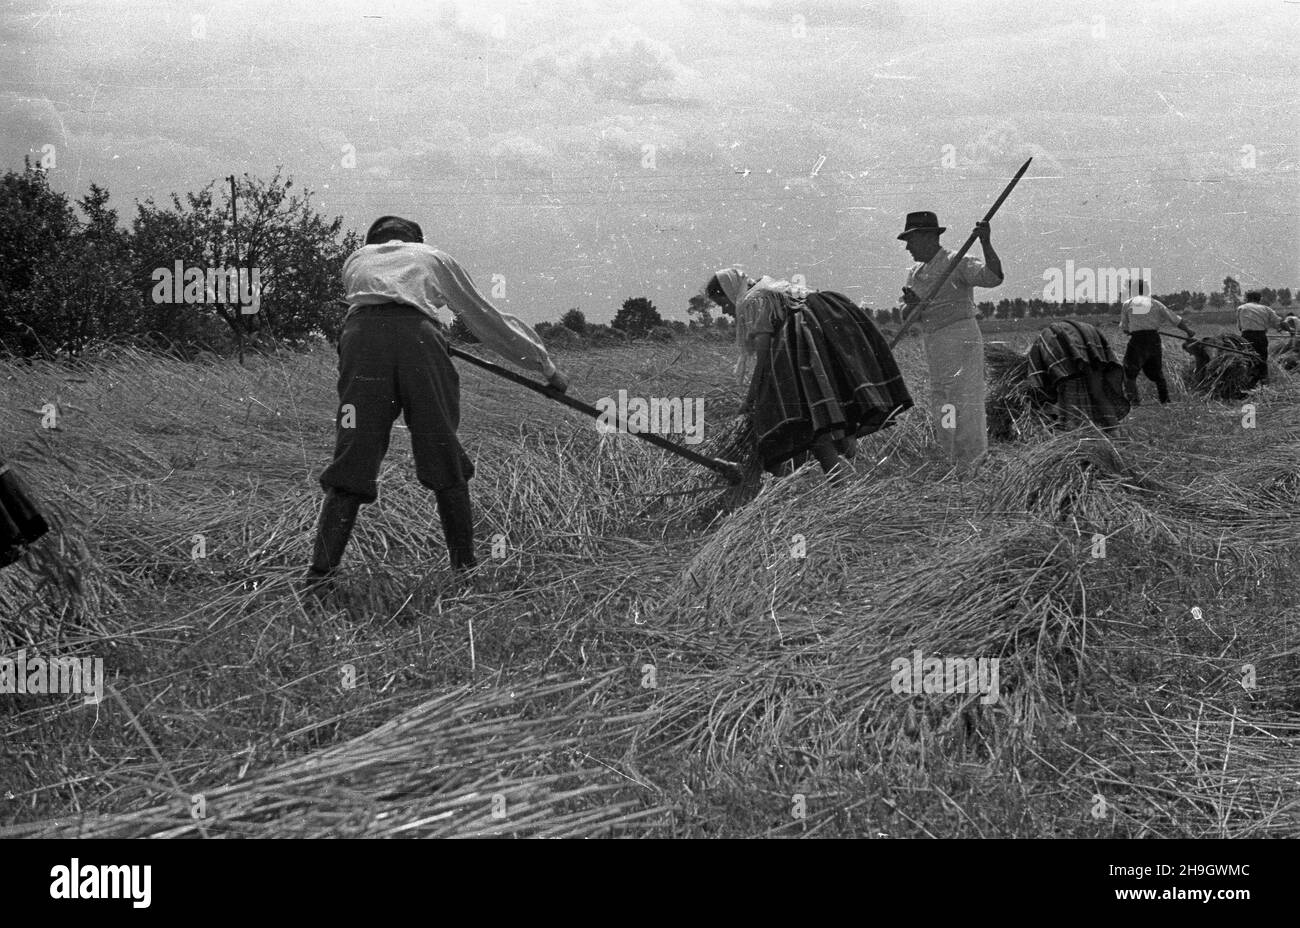 Reaping Harvest Black and White Stock Photos & Images - Alamy